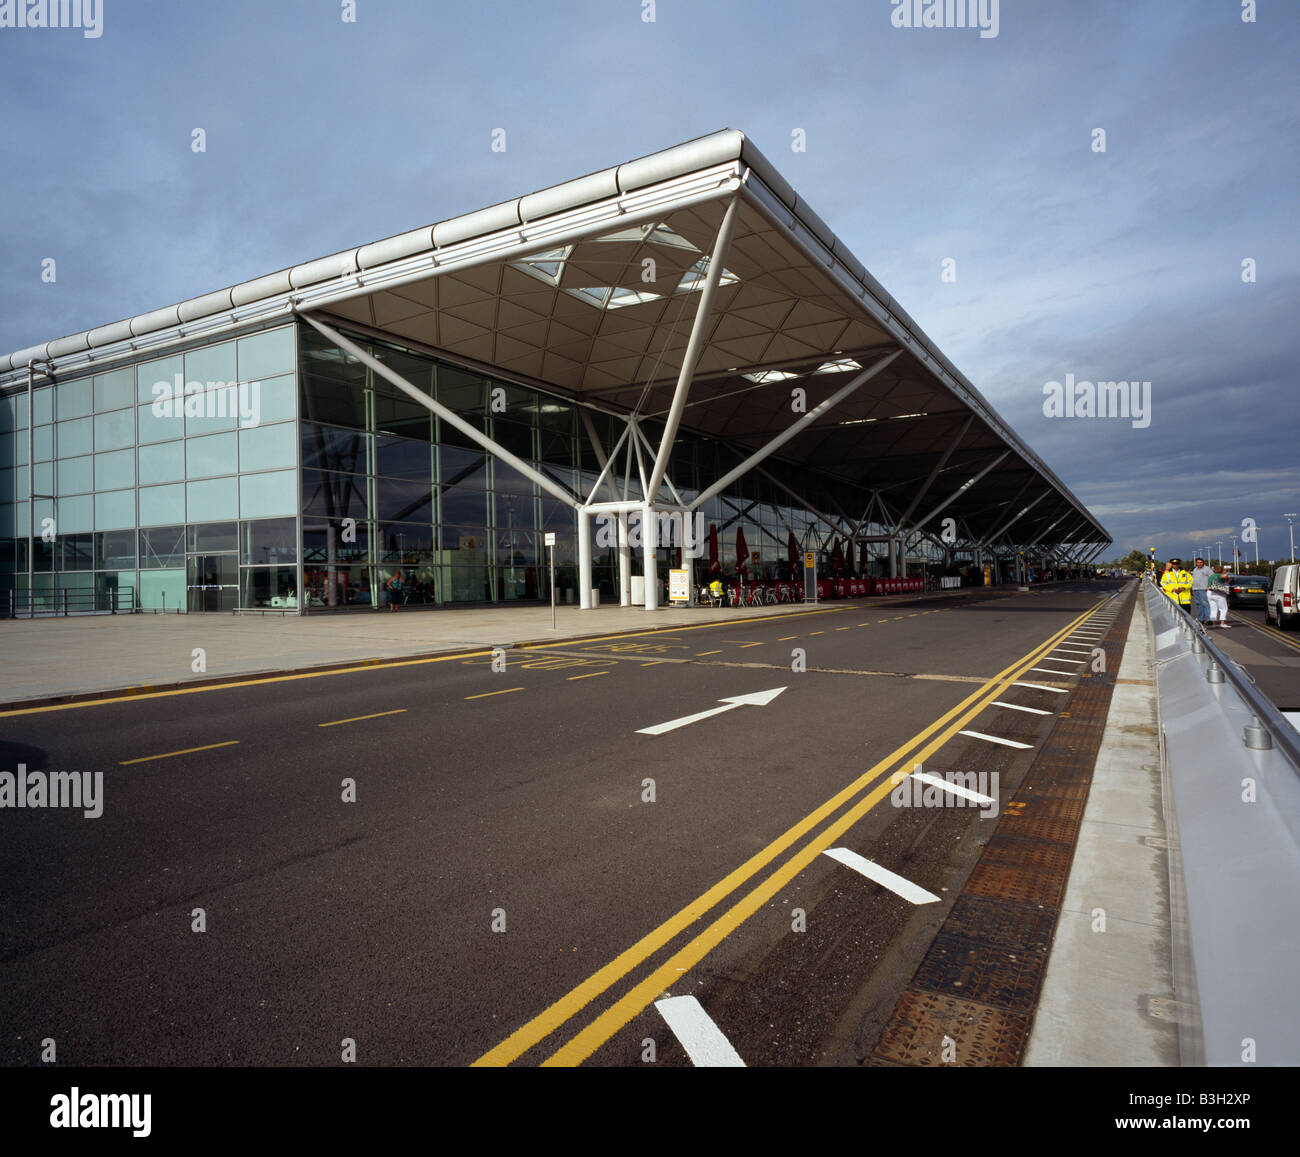 London Stansted Airport terminal building, Essex, England, UK. Stock Photo